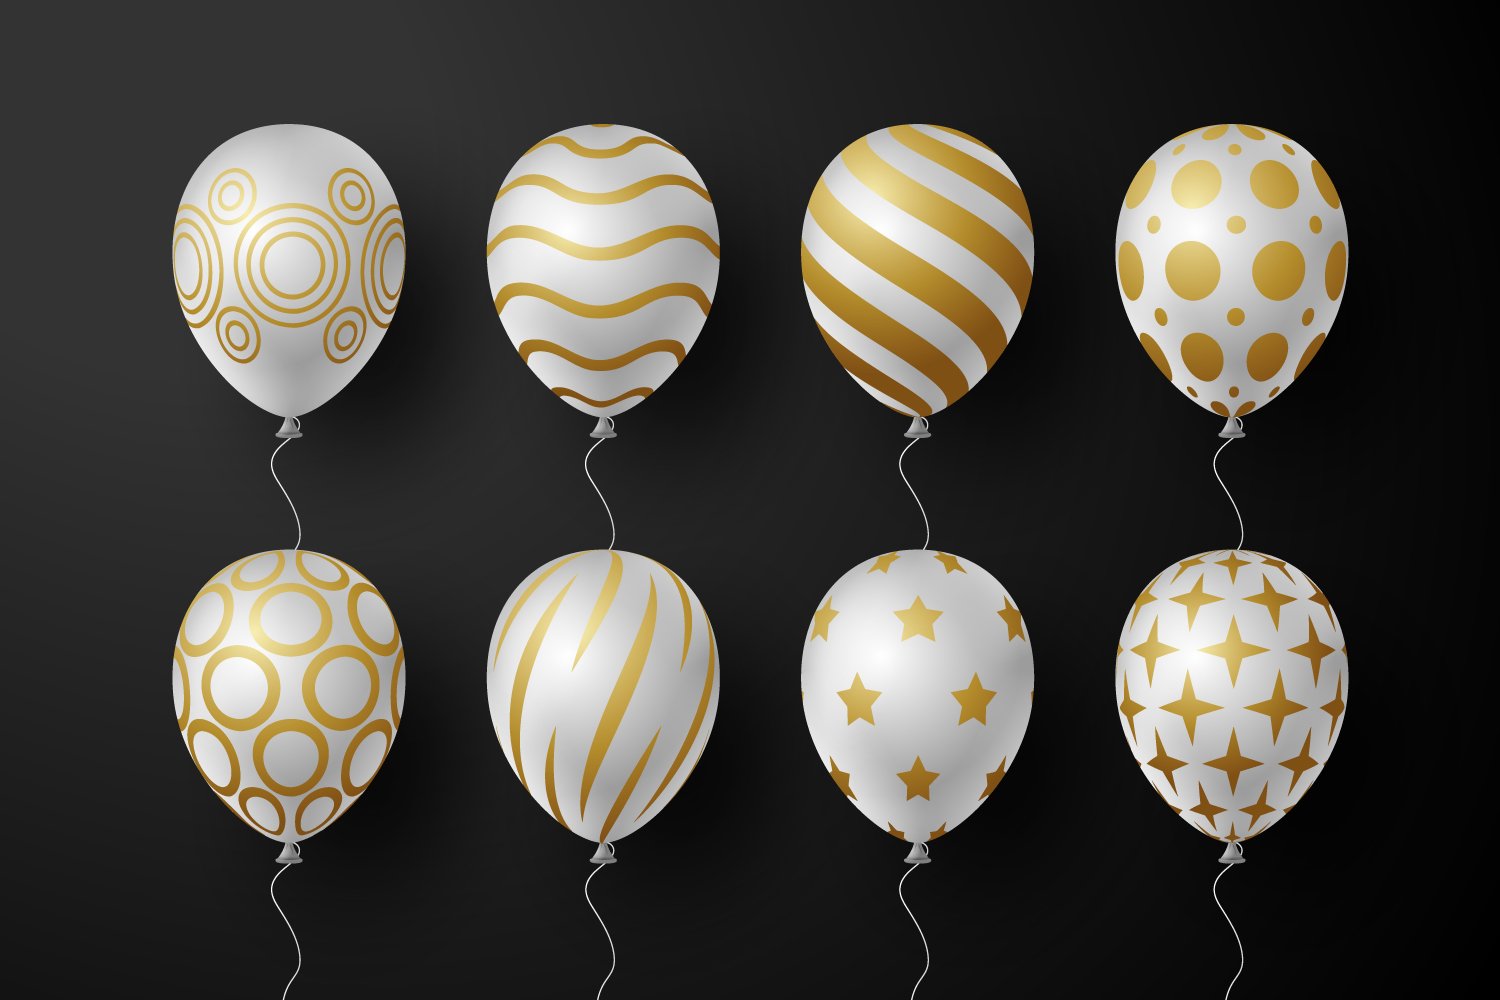 Gold balloons with prints and other colors.